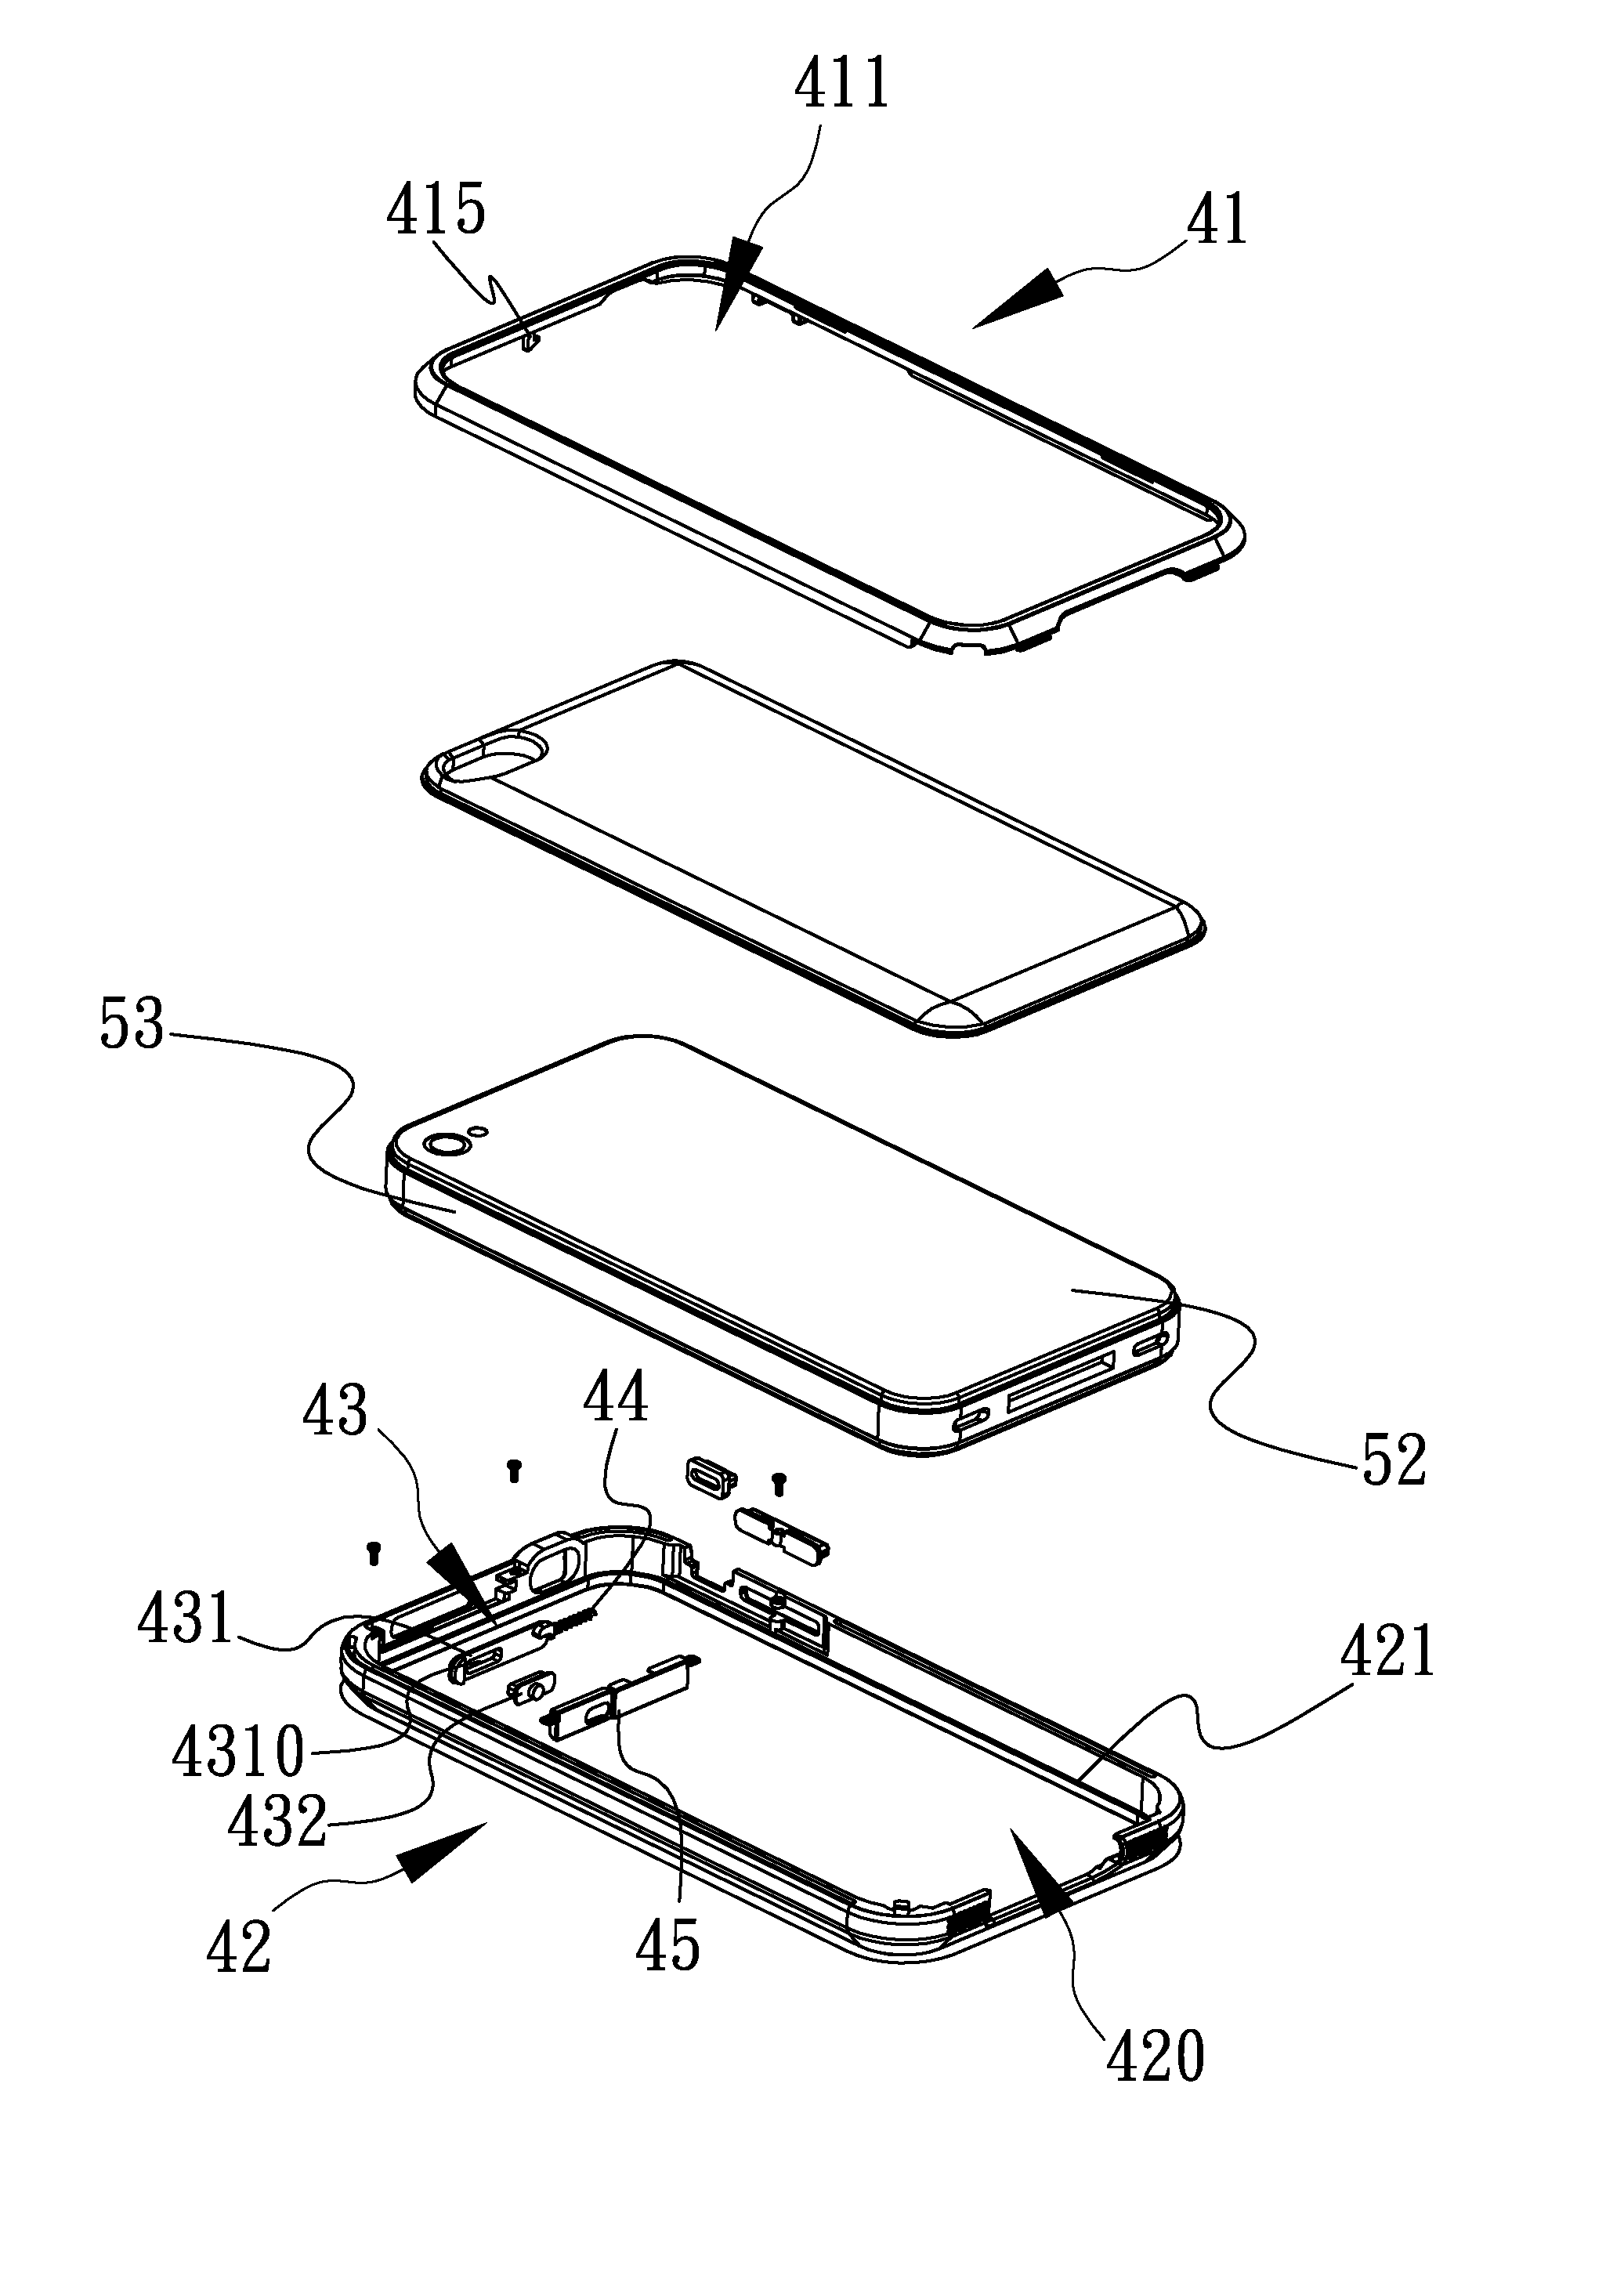 Protective clamp frame having power and unclamp duplex button for mobile communication devices